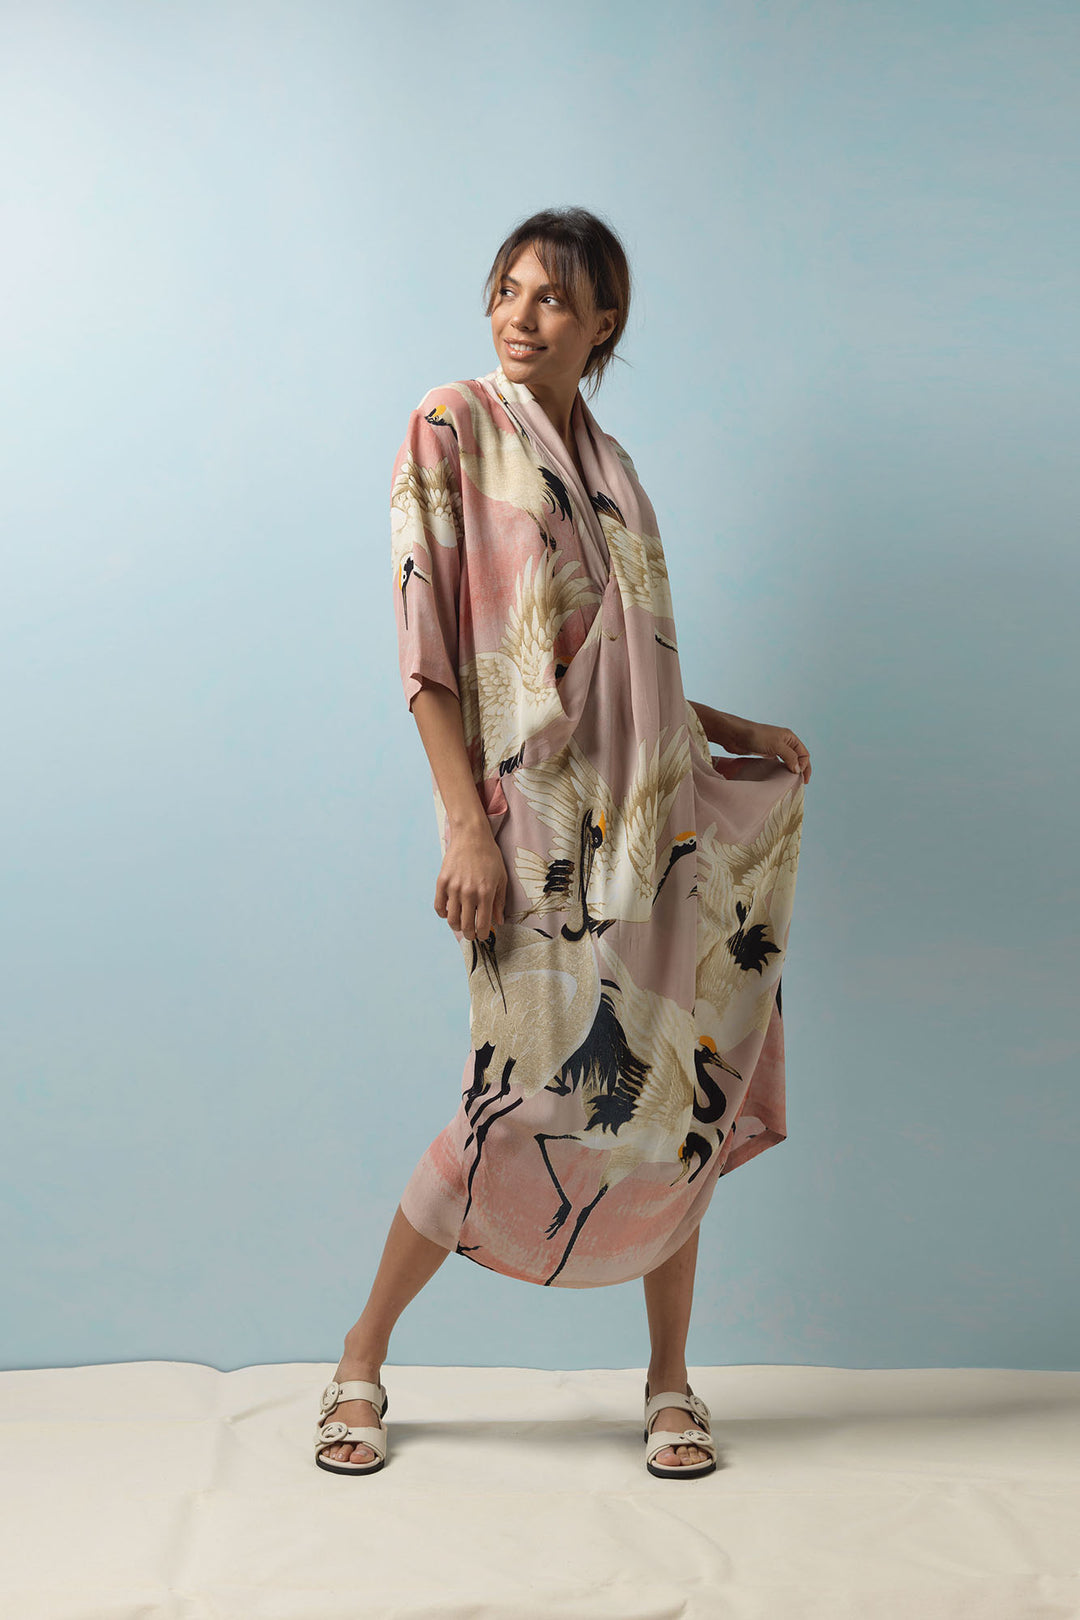 One Hundred Stars Stork Crane Plaster Pink Dress is a perfect summer holiday look, which can be paired with flat or heeled sandals this season for a stylish, luxurious outfit.